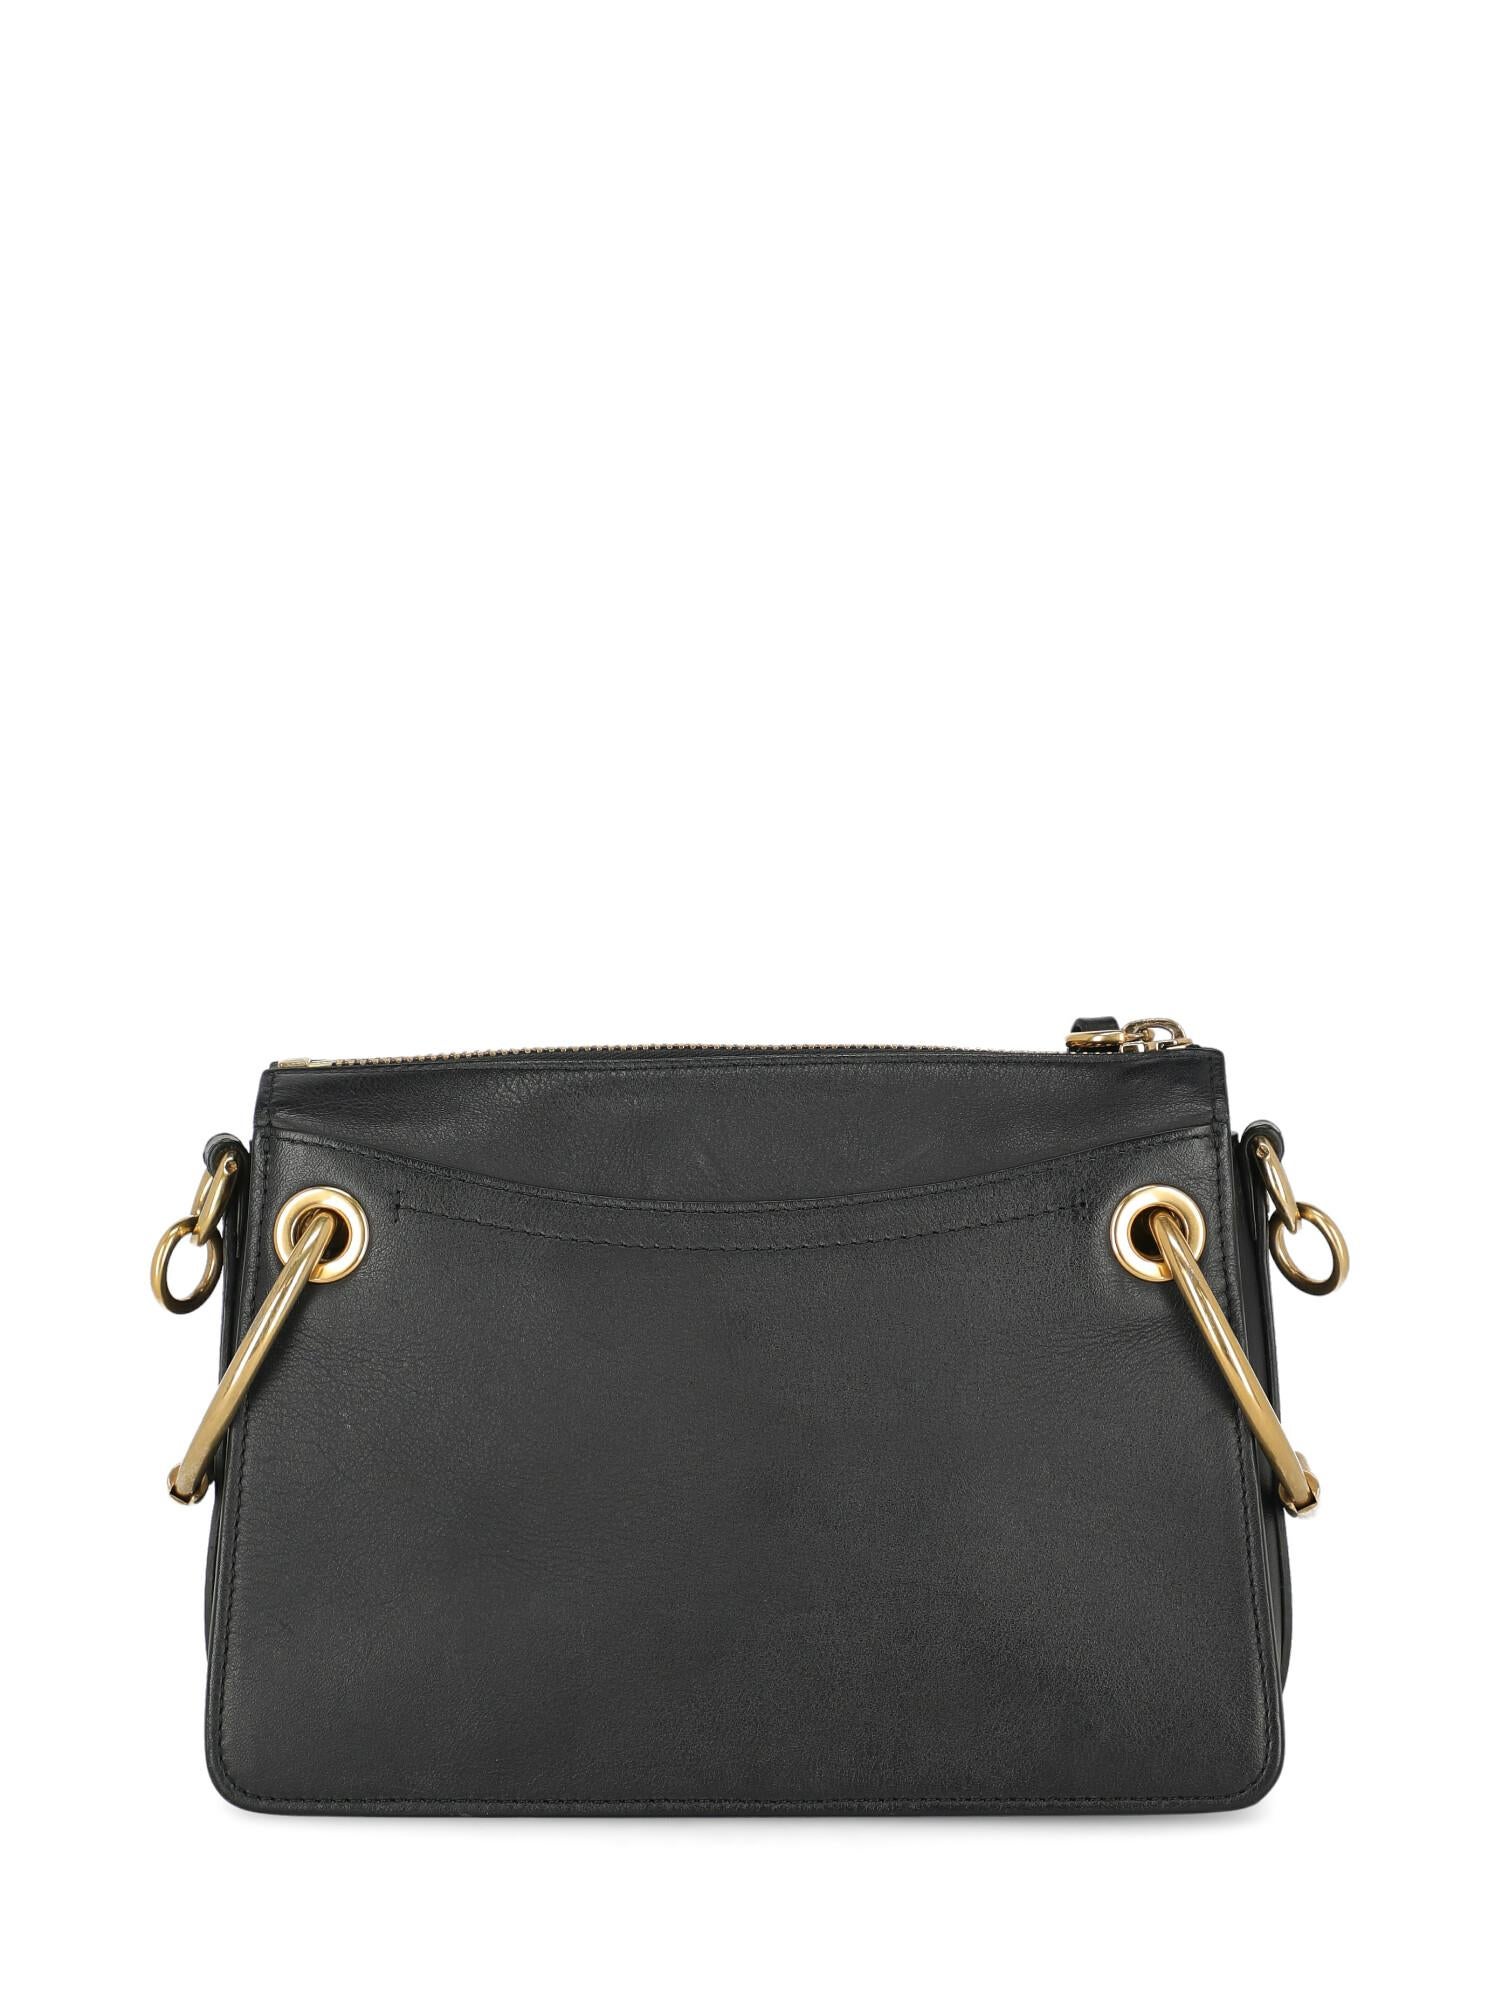 ChloÃ© Woman Shoulder bag Navy Leather In Fair Condition For Sale In Milan, IT